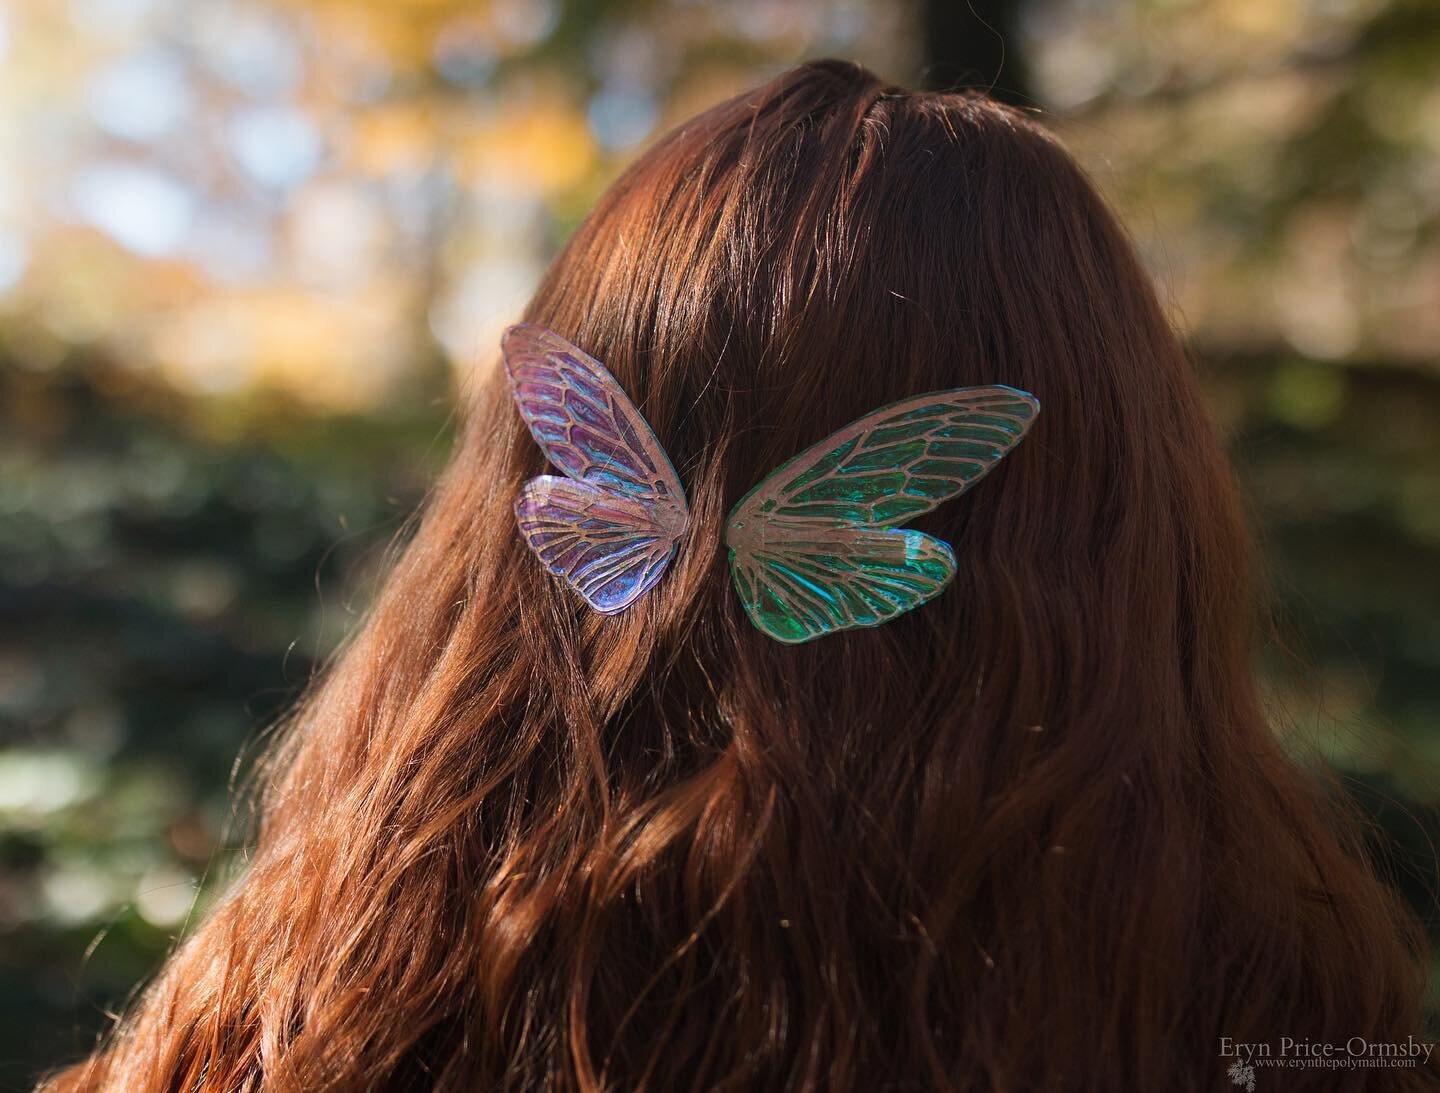 Introducing my newest magical ware, faerie wing hair clips! I am able to make them in a variety of customised sizes and colours and will be updating the shop with them next week, but this lot will be available tomorrow in person at the Candler Park A